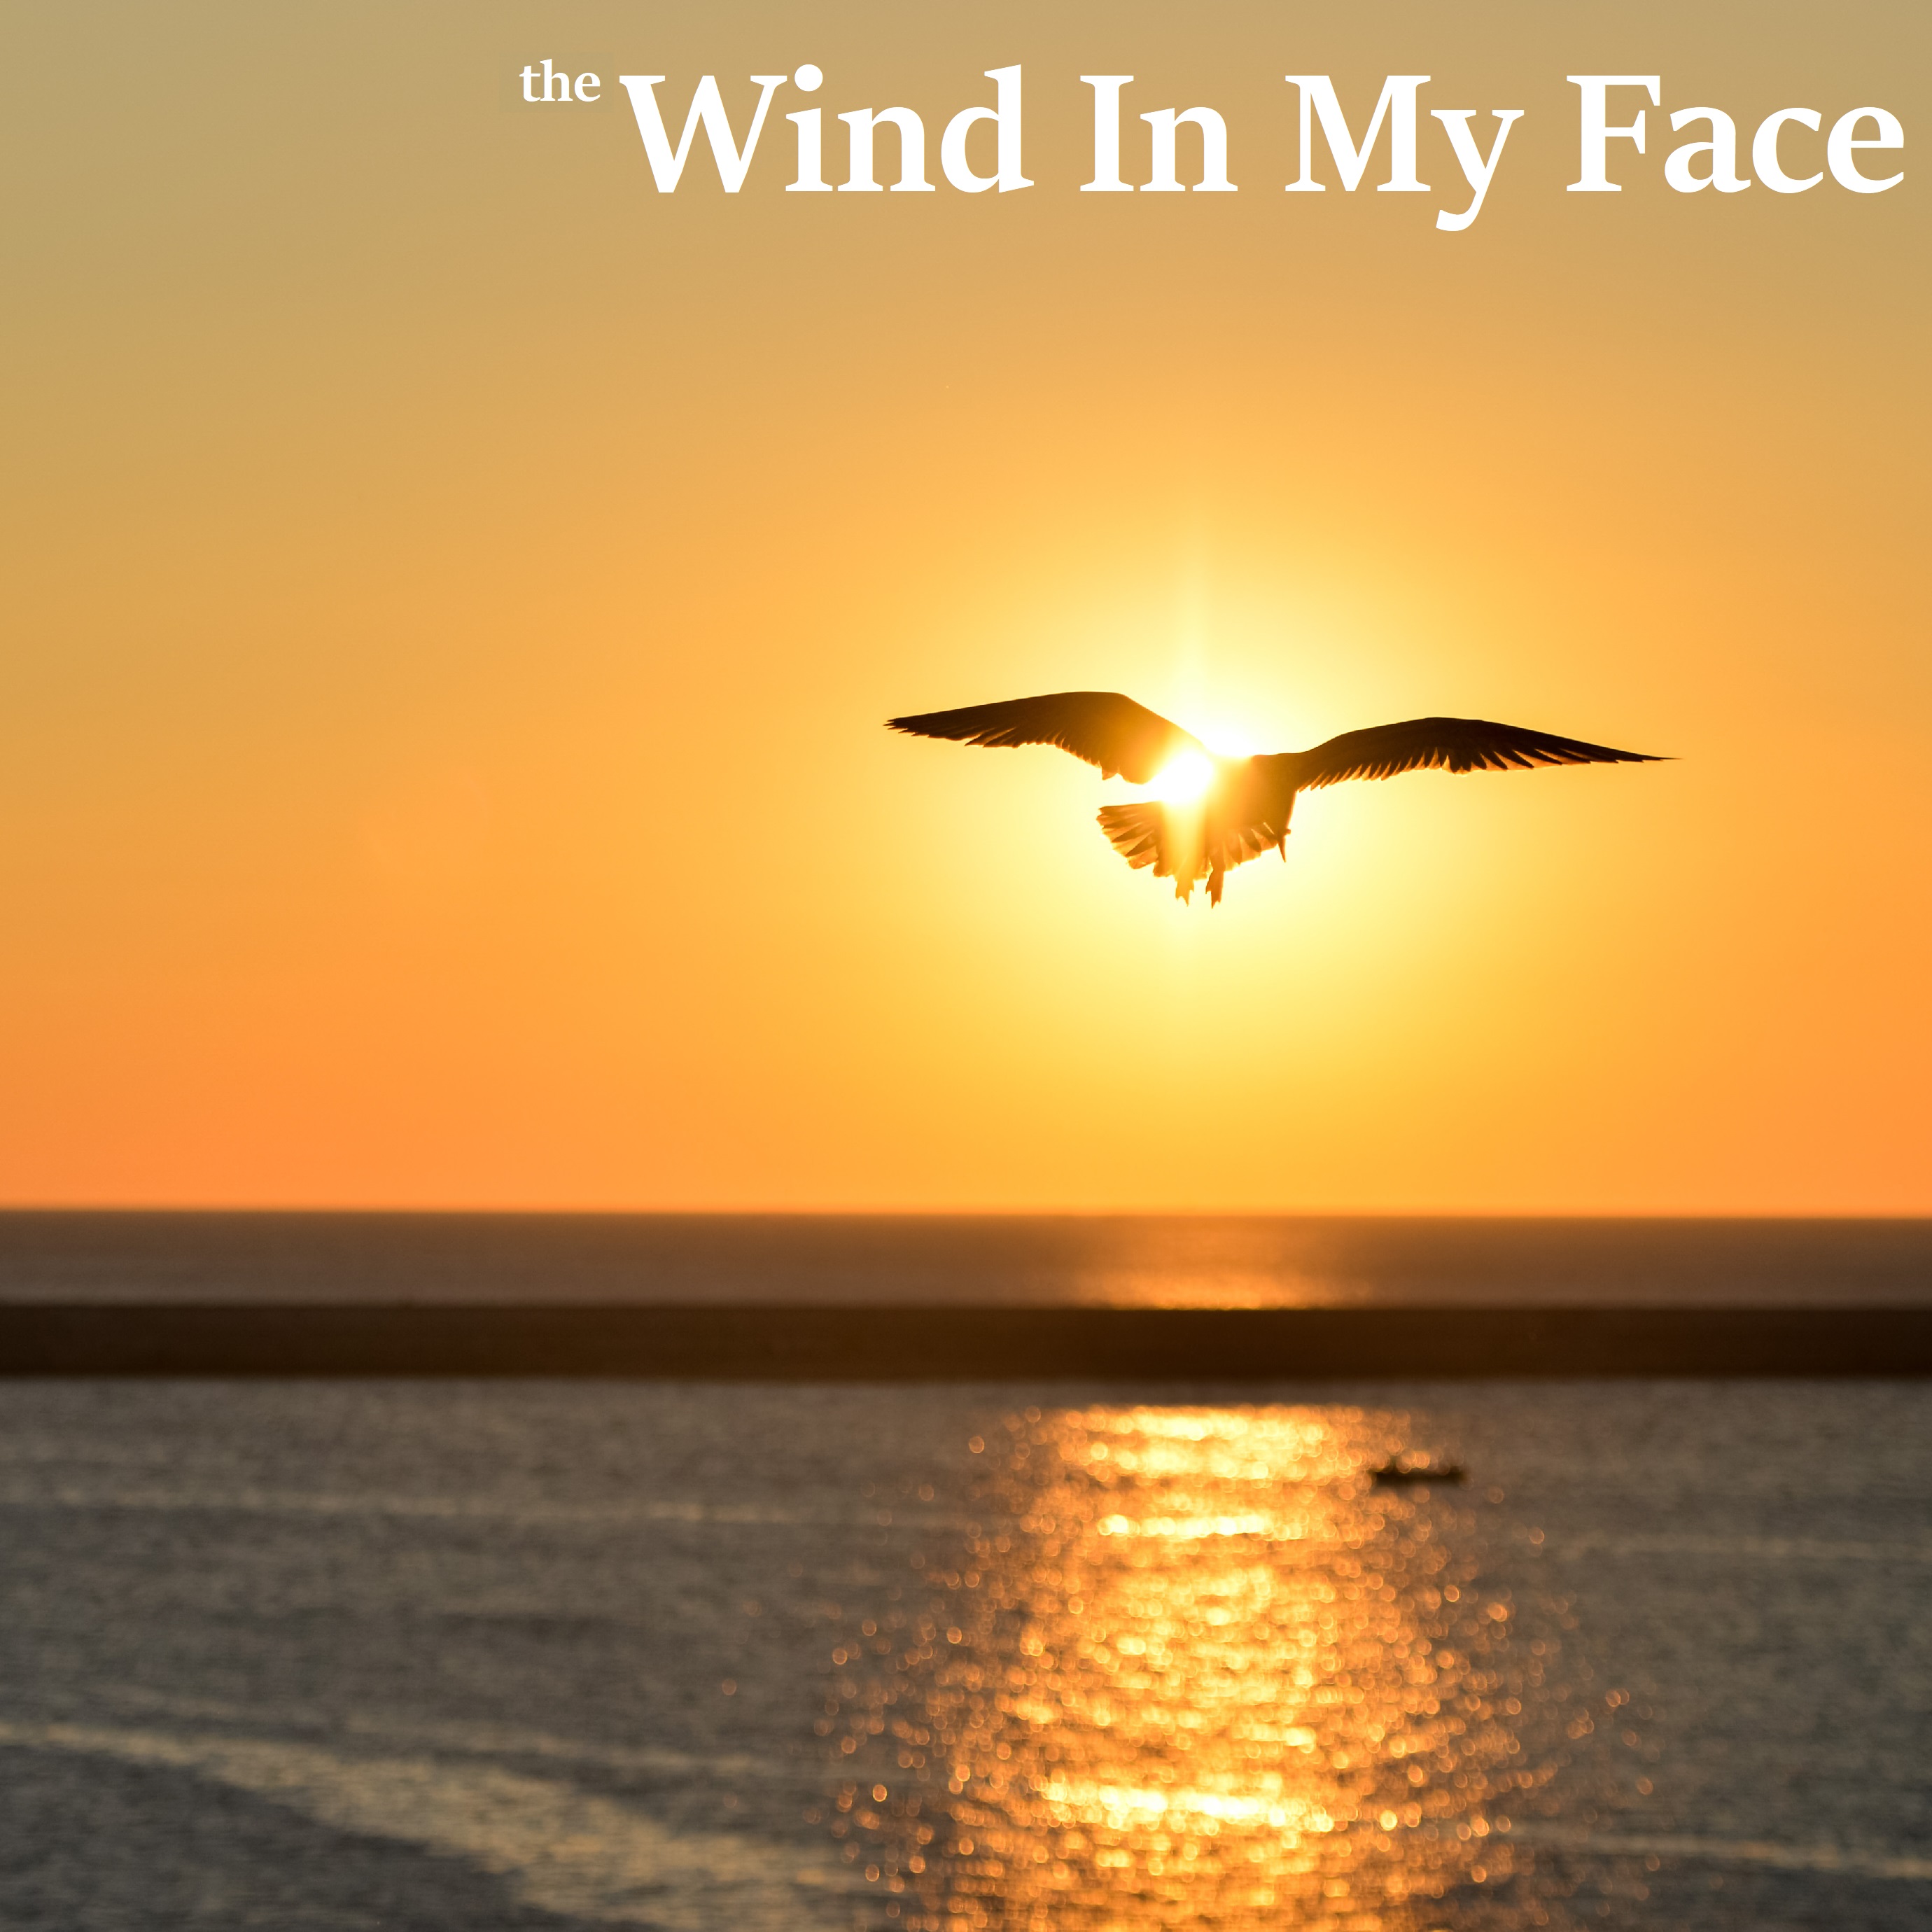 THE WIND IN MY FACE